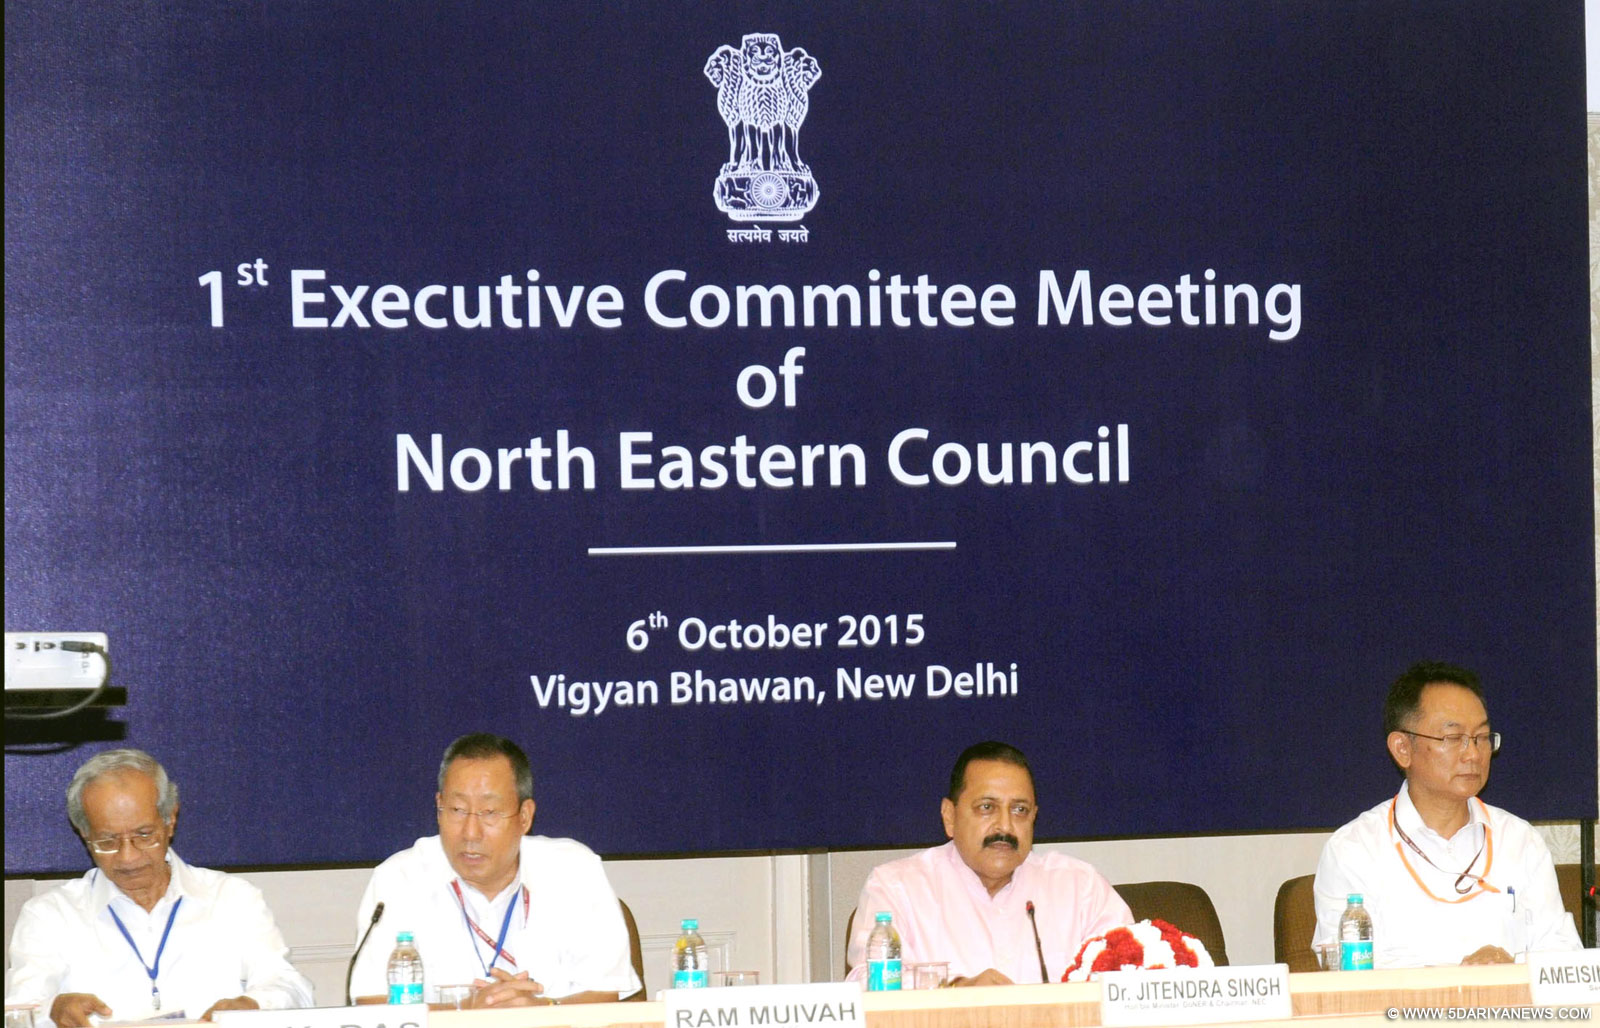  Dr. Jitendra Singh chairing the 1st Executive Committee Meeting of North Eastern Council, in New Delhi on October 06, 2015.